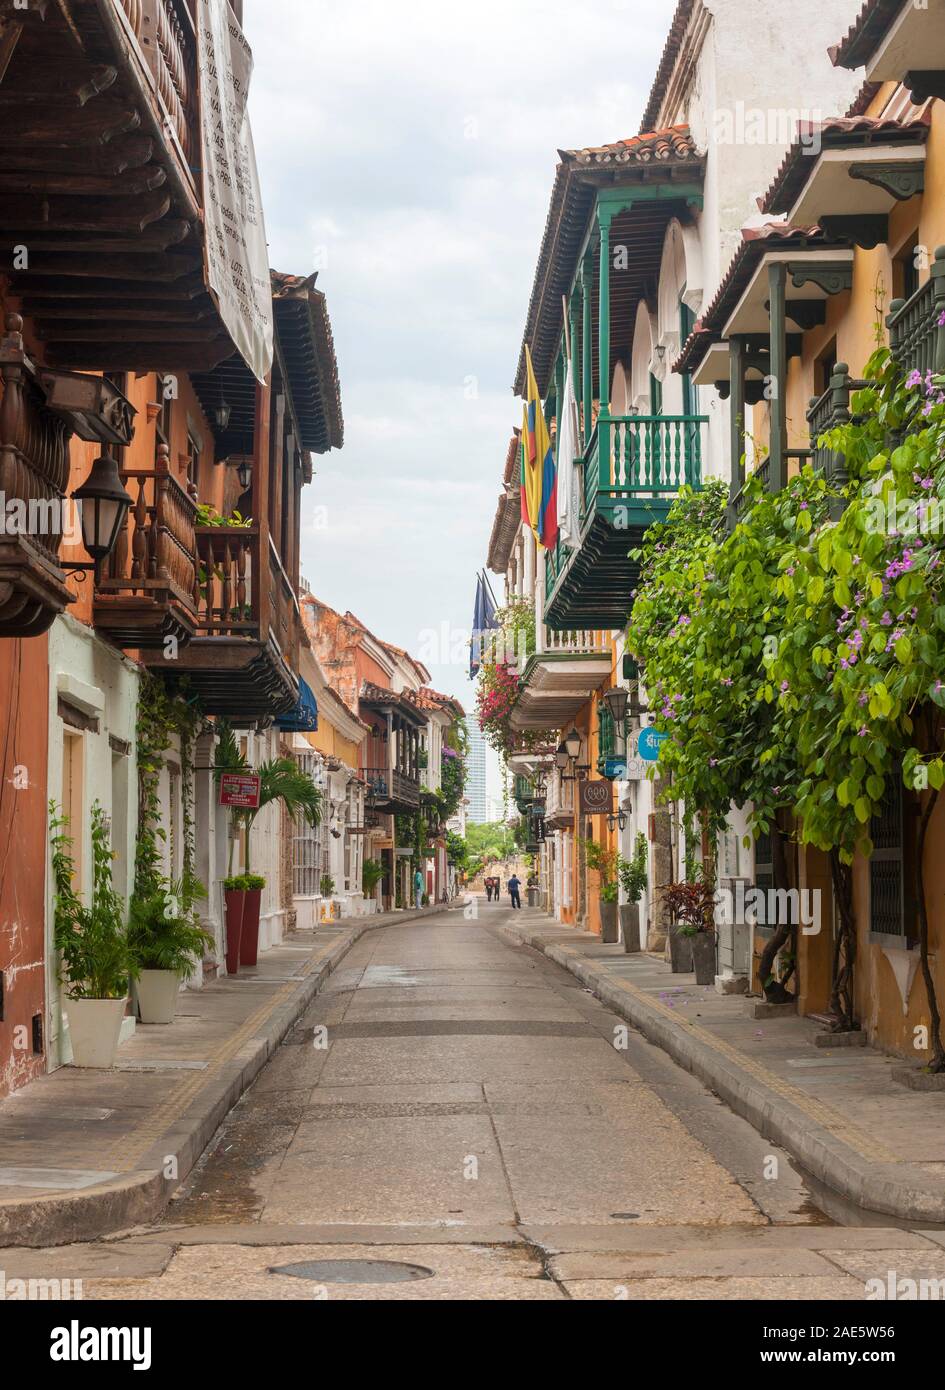 A street and buildings in the old city in Cartagena, Colombia. Stock Photo